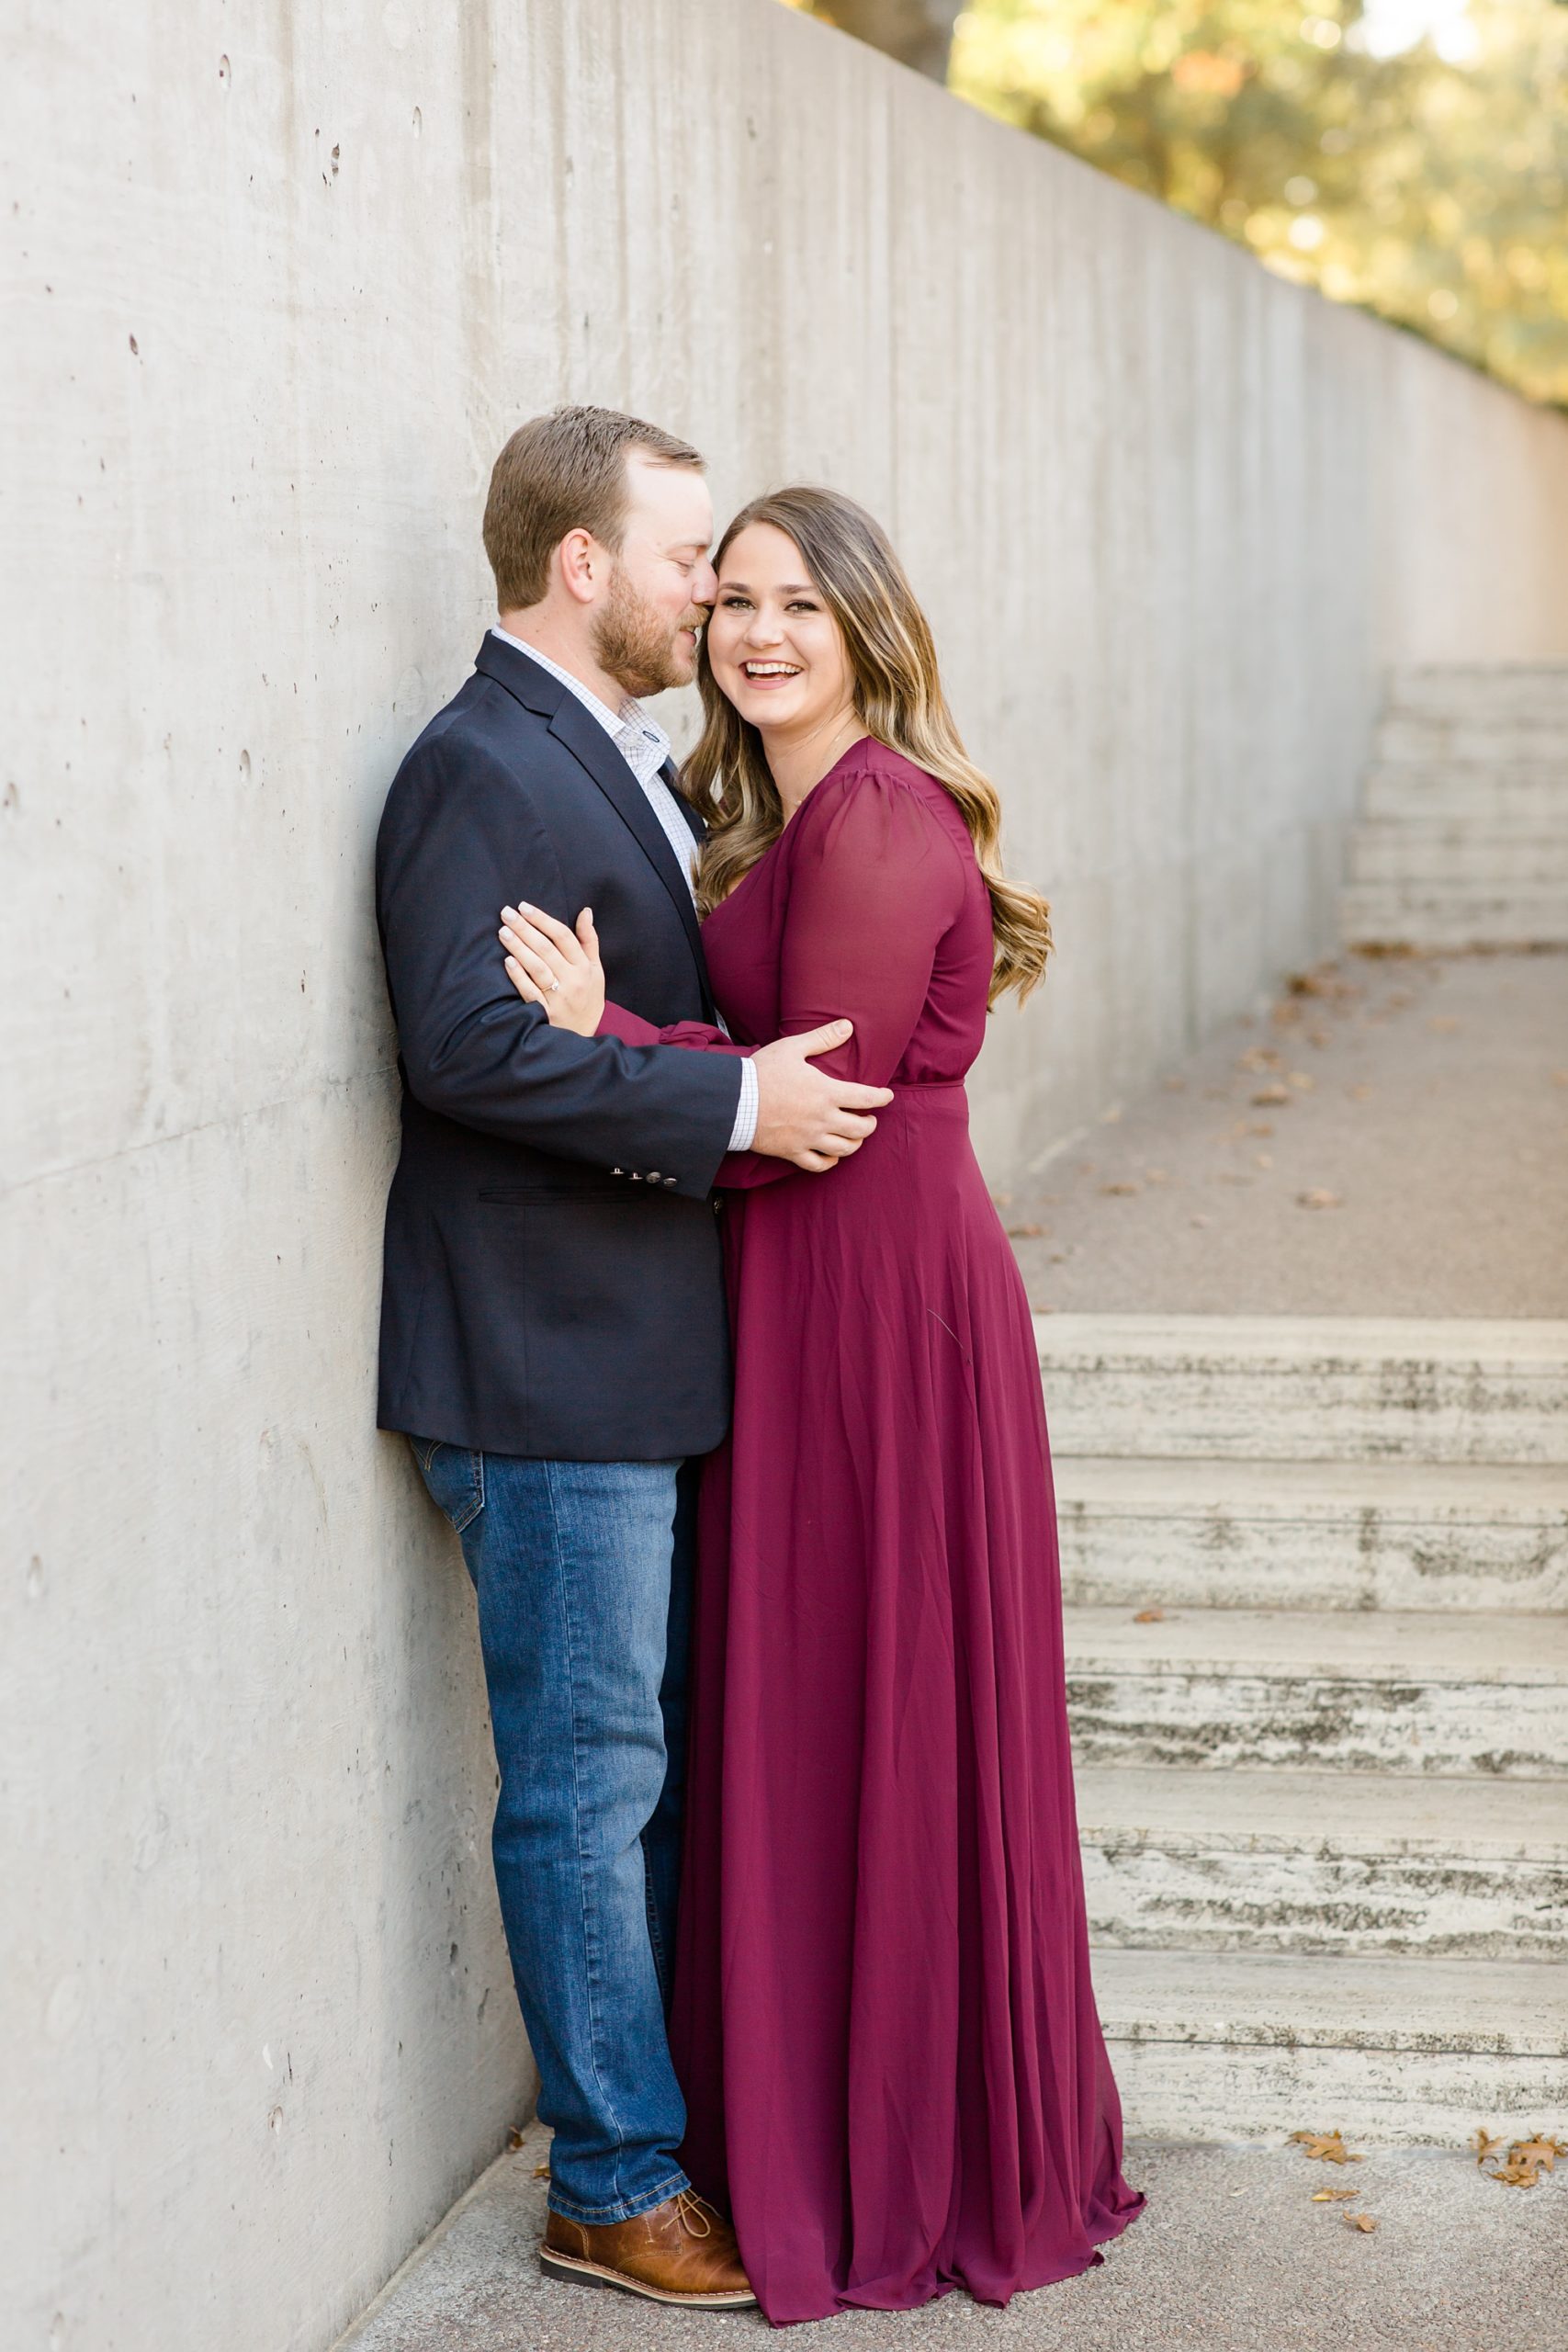 Dallas TX engagement session at Kimball Art Museum